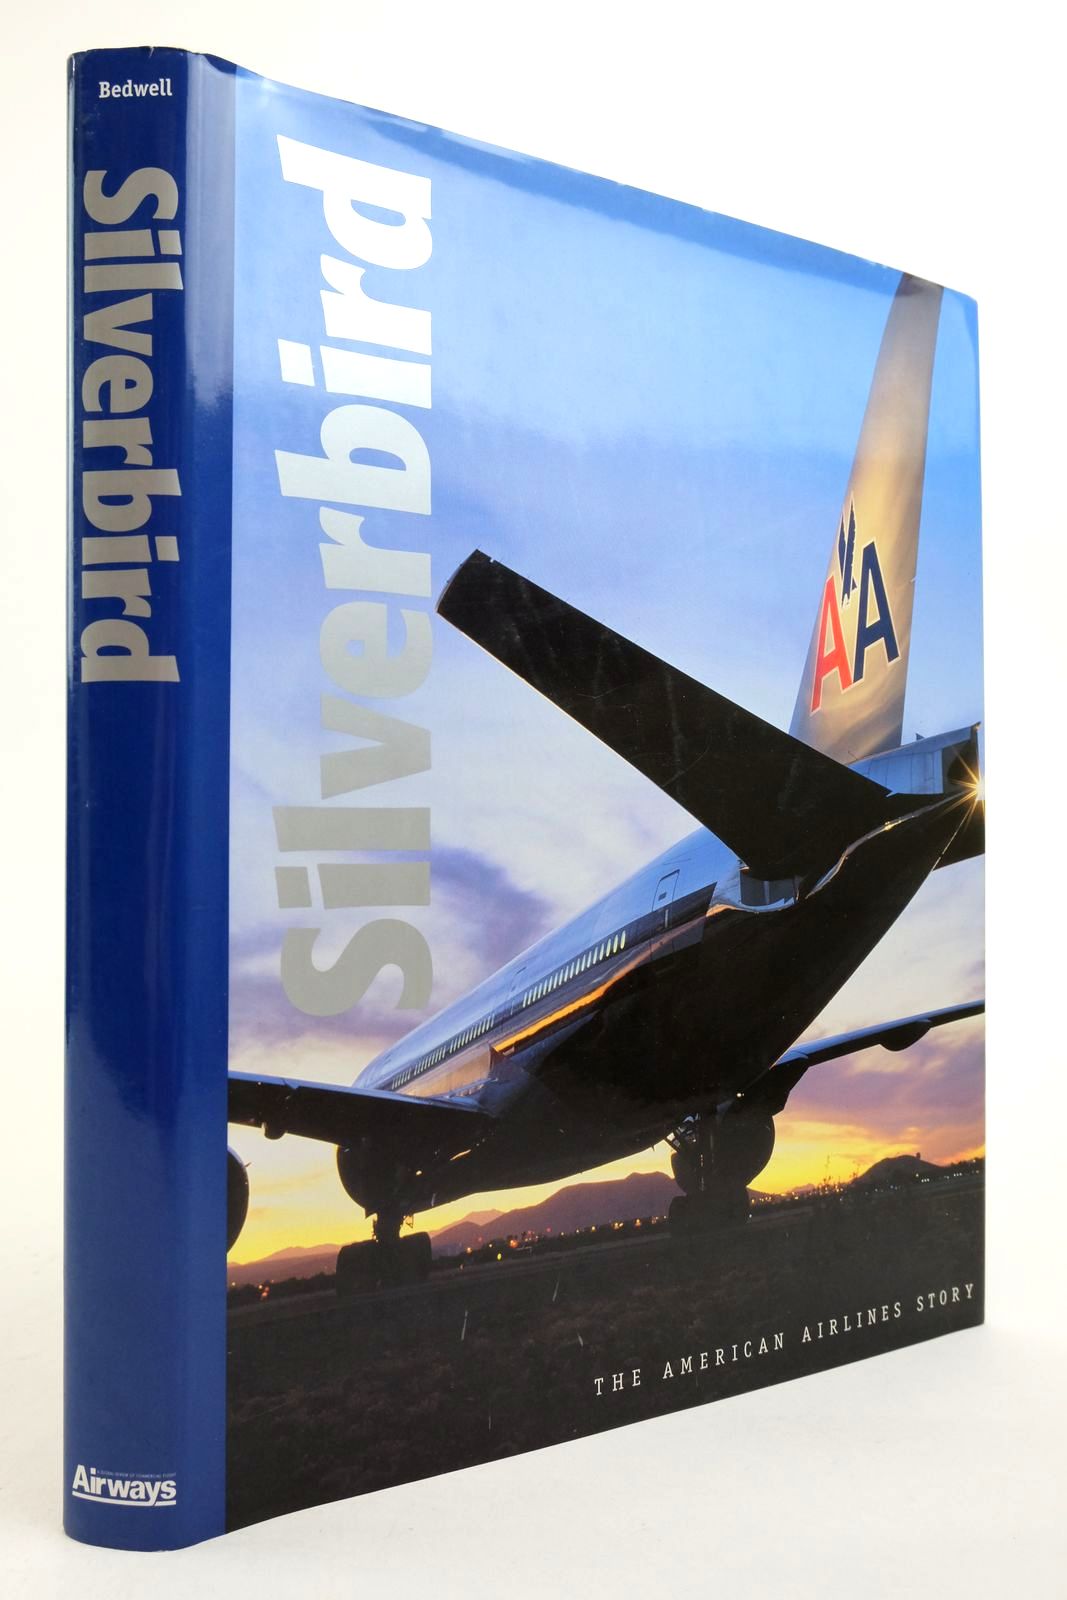 Photo of SILVERBIRD: THE AMERICAN AIRLINES STORY written by Bedwell, Don published by Airways International Inc, (STOCK CODE: 2139444)  for sale by Stella & Rose's Books